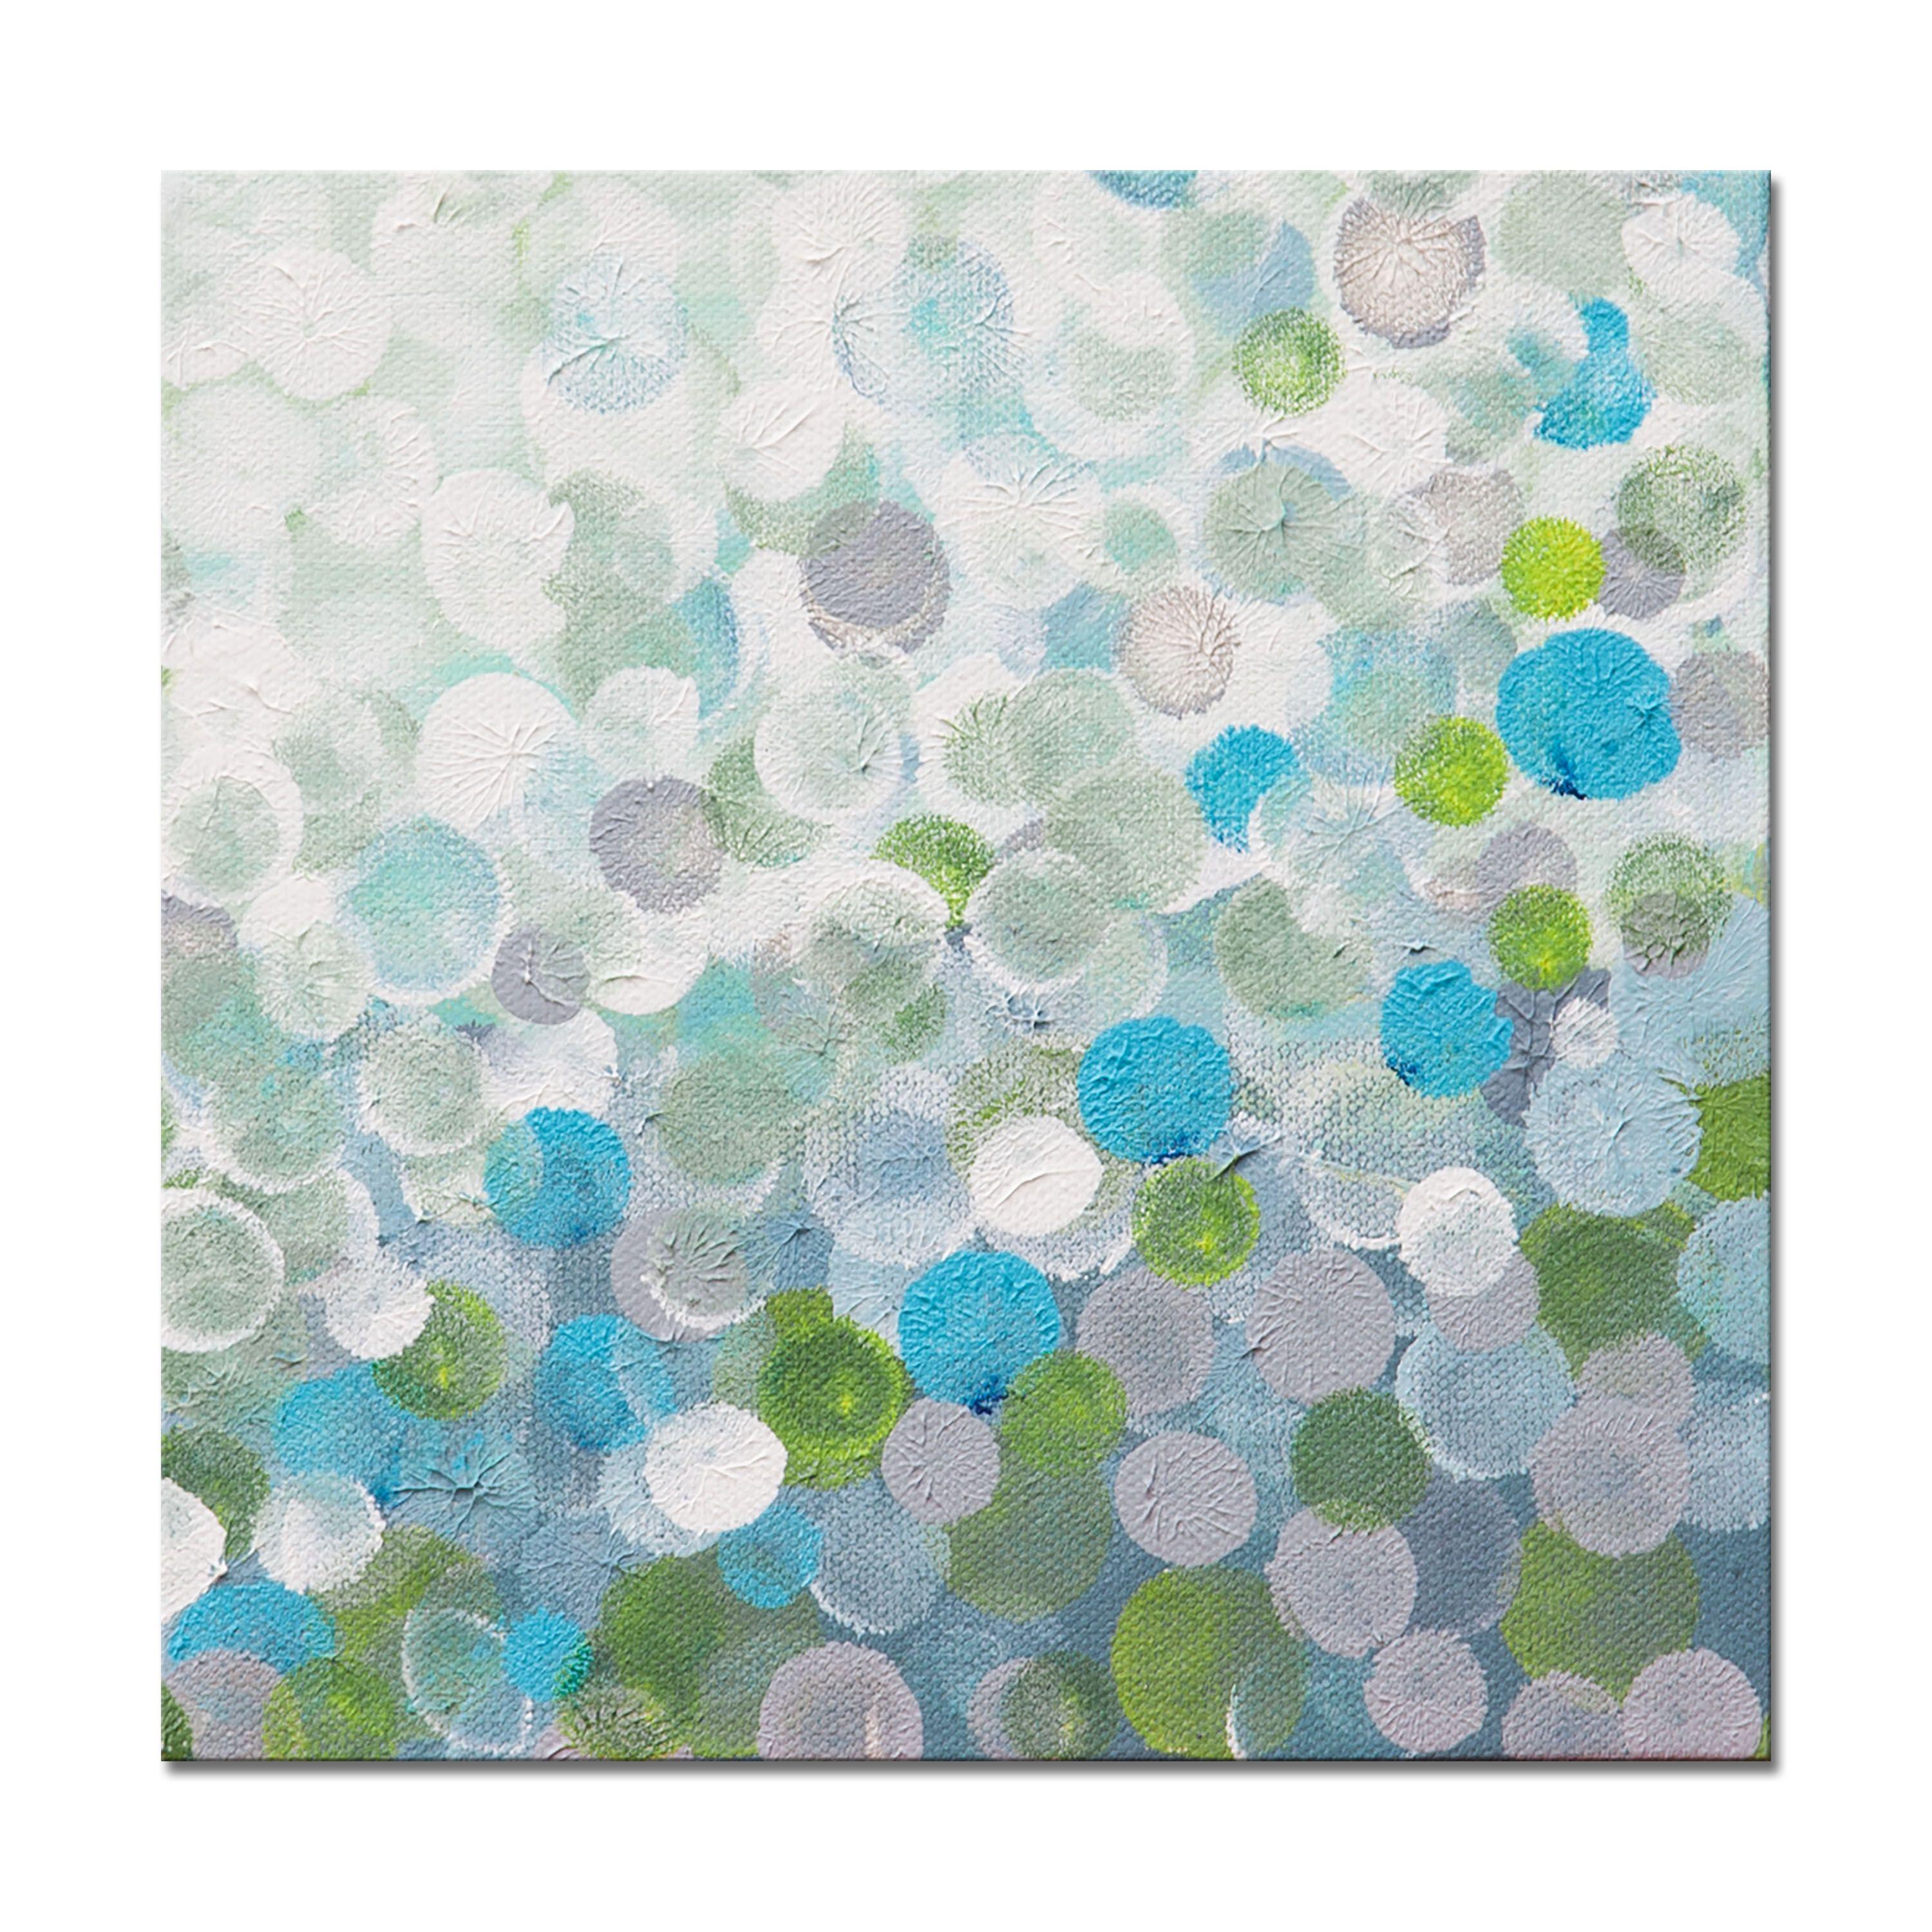 Infinity 3 is an original painting, created with acrylic paint on gallery-wrapped canvas. It has a width of 8 inches and a height of 8 inches with a depth of 1.5 inches (8x8x1.5). The colors used in the painting are white, blue, green, and gray, and